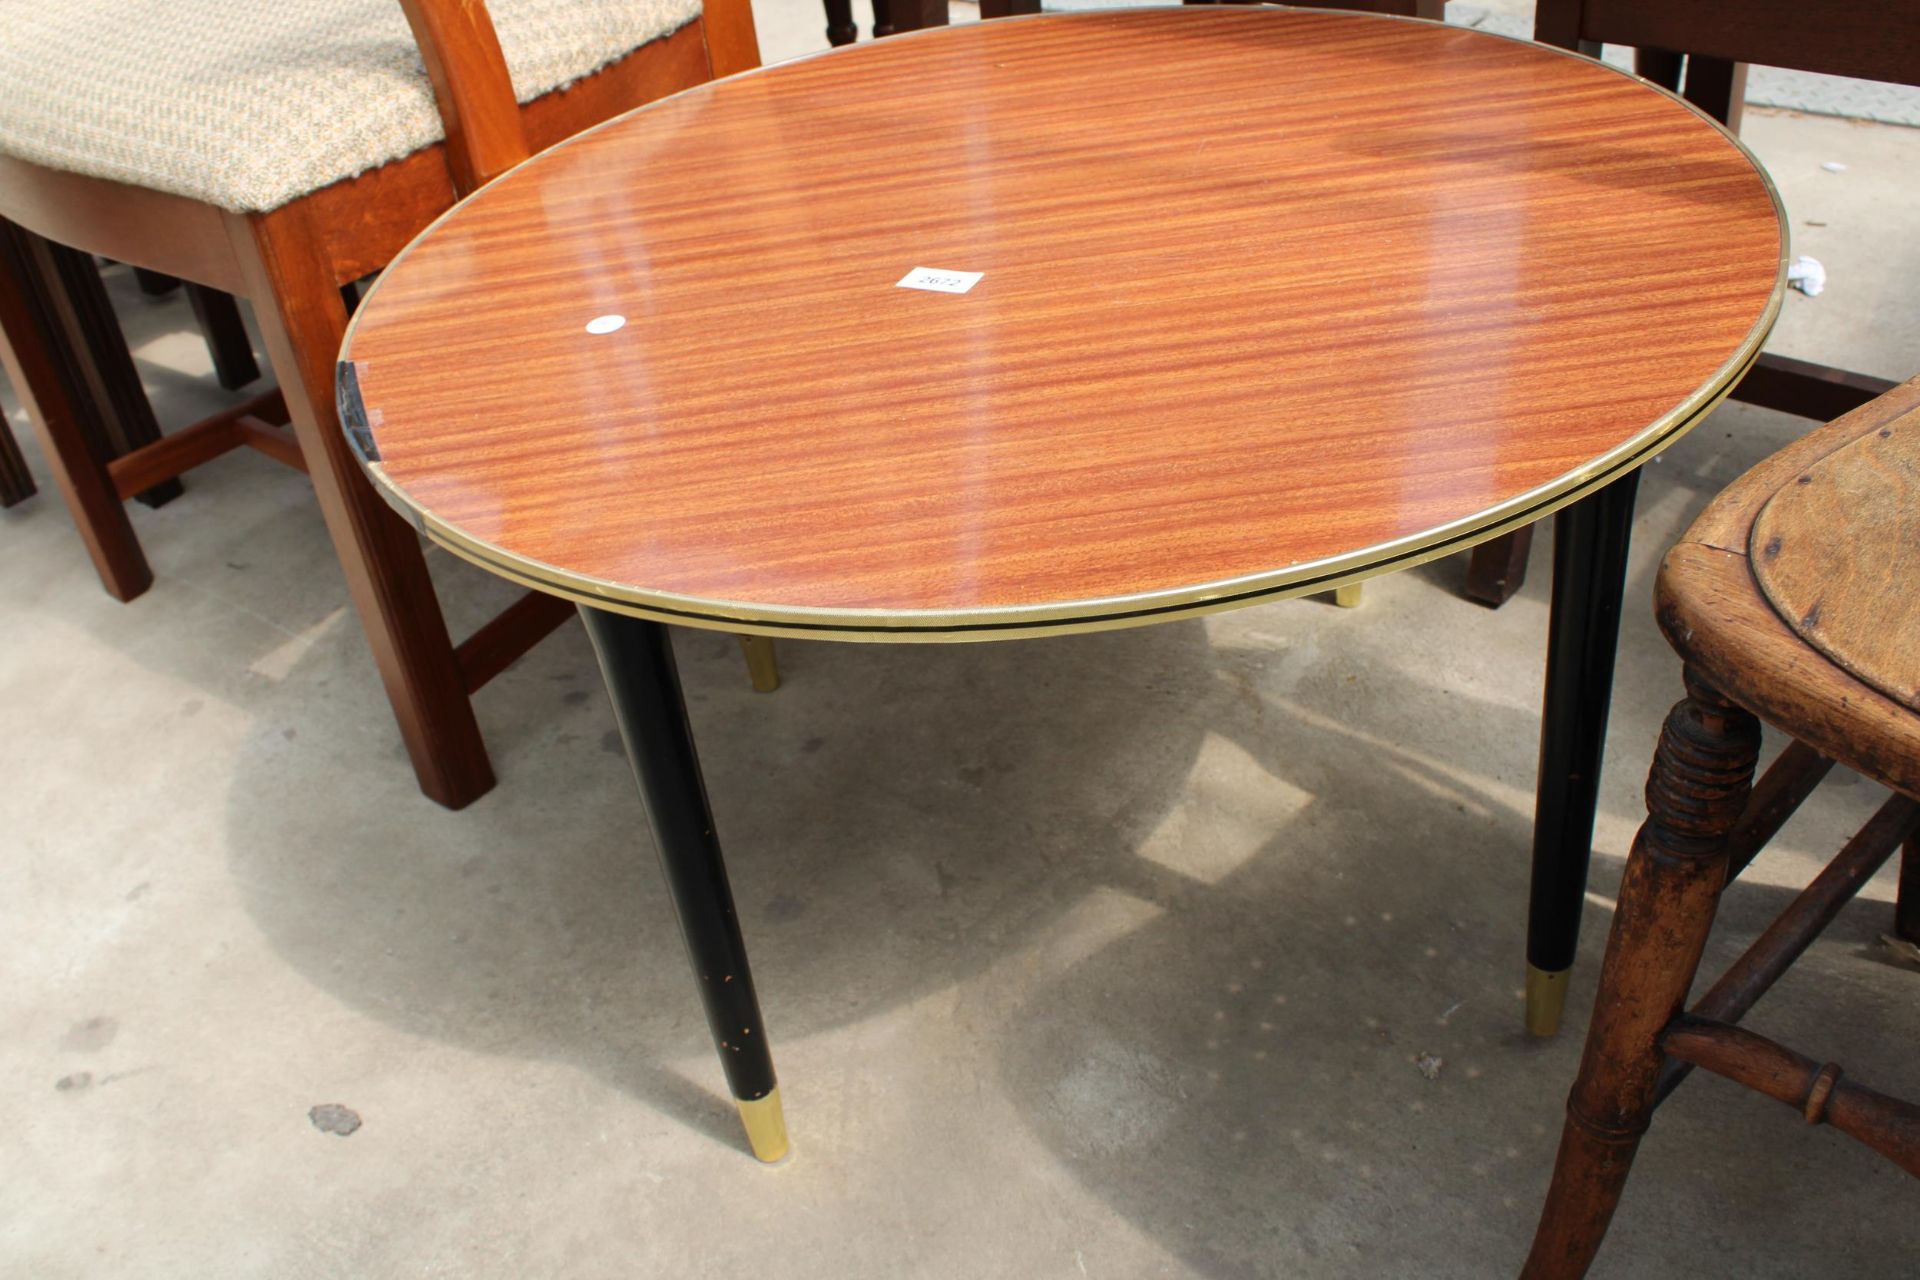 A RETRO TEAK McINTOSH CARVER CHAIR AND 28" DIAMETER FORMICA TOP COFFEE TABLE ON BLACK TAPERING LEGS - Image 2 of 3